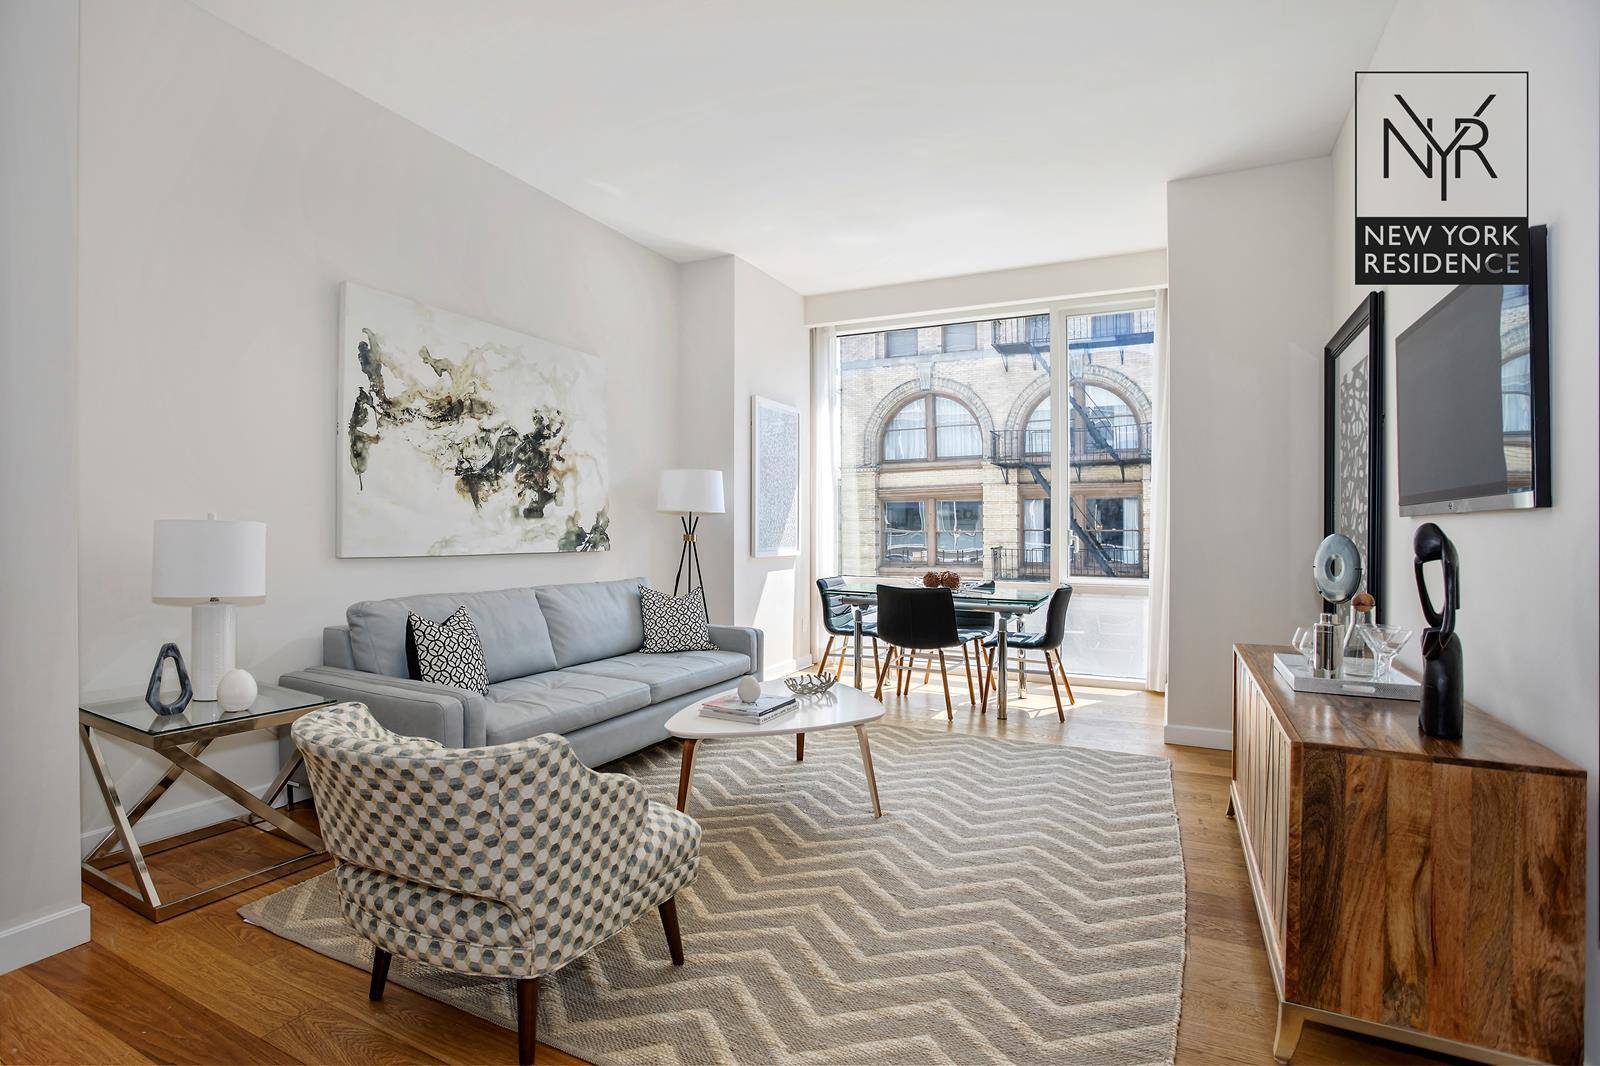 Designed by Gwathmey Siegel Associates Architects and completed in 2007, 311 West Broadway is one of the few modern luxury condominiums located in the heart of Soho.